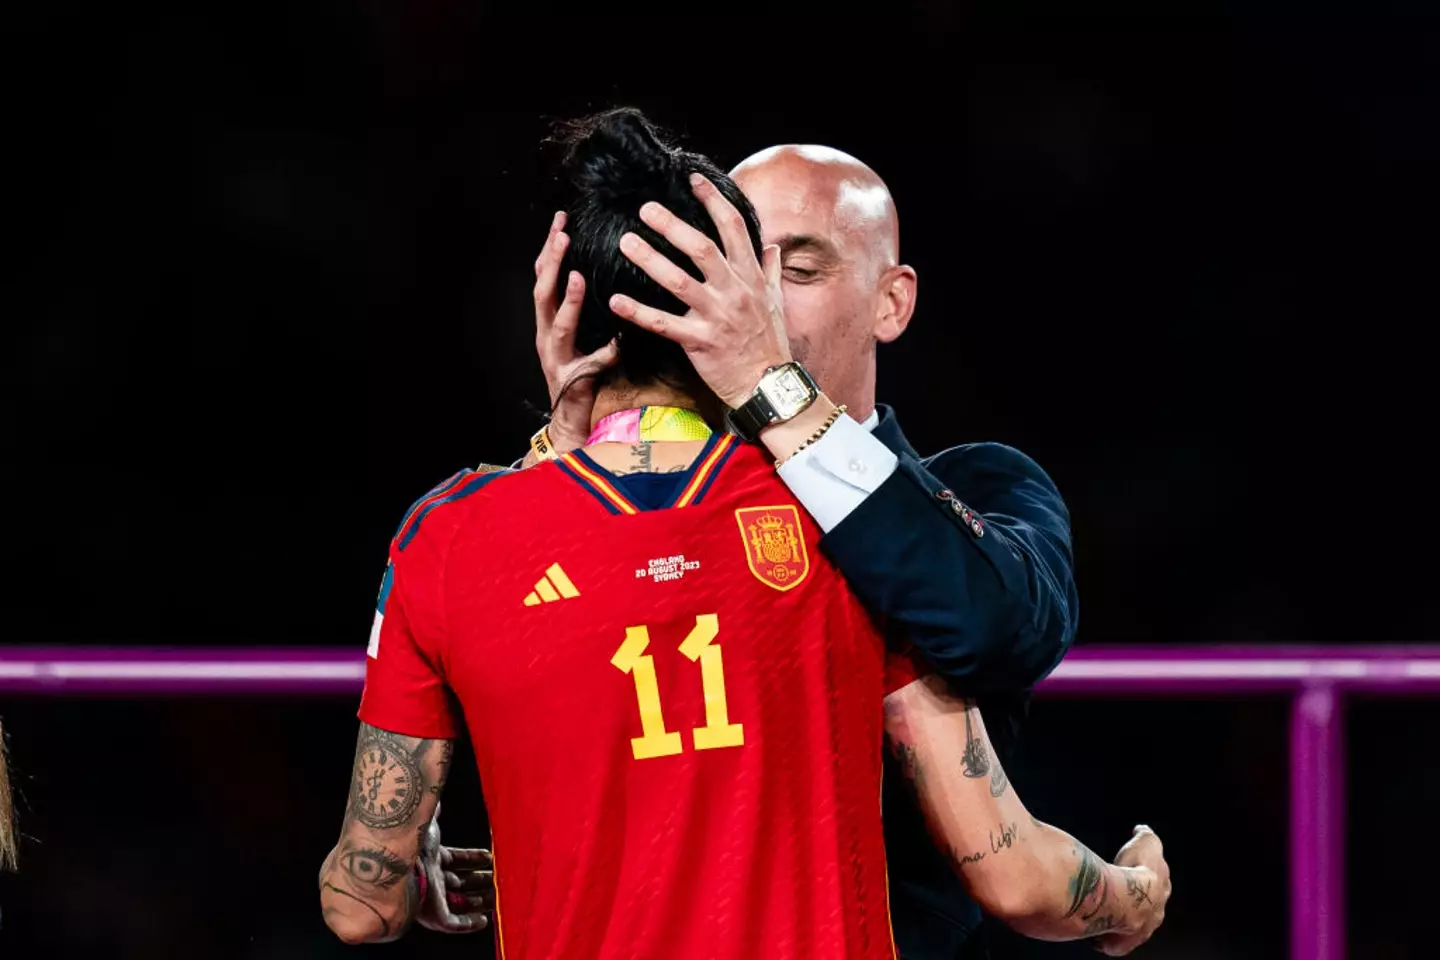 Luis Rubiales has faced fierce backlash over his actions at the Women's World Cup final.